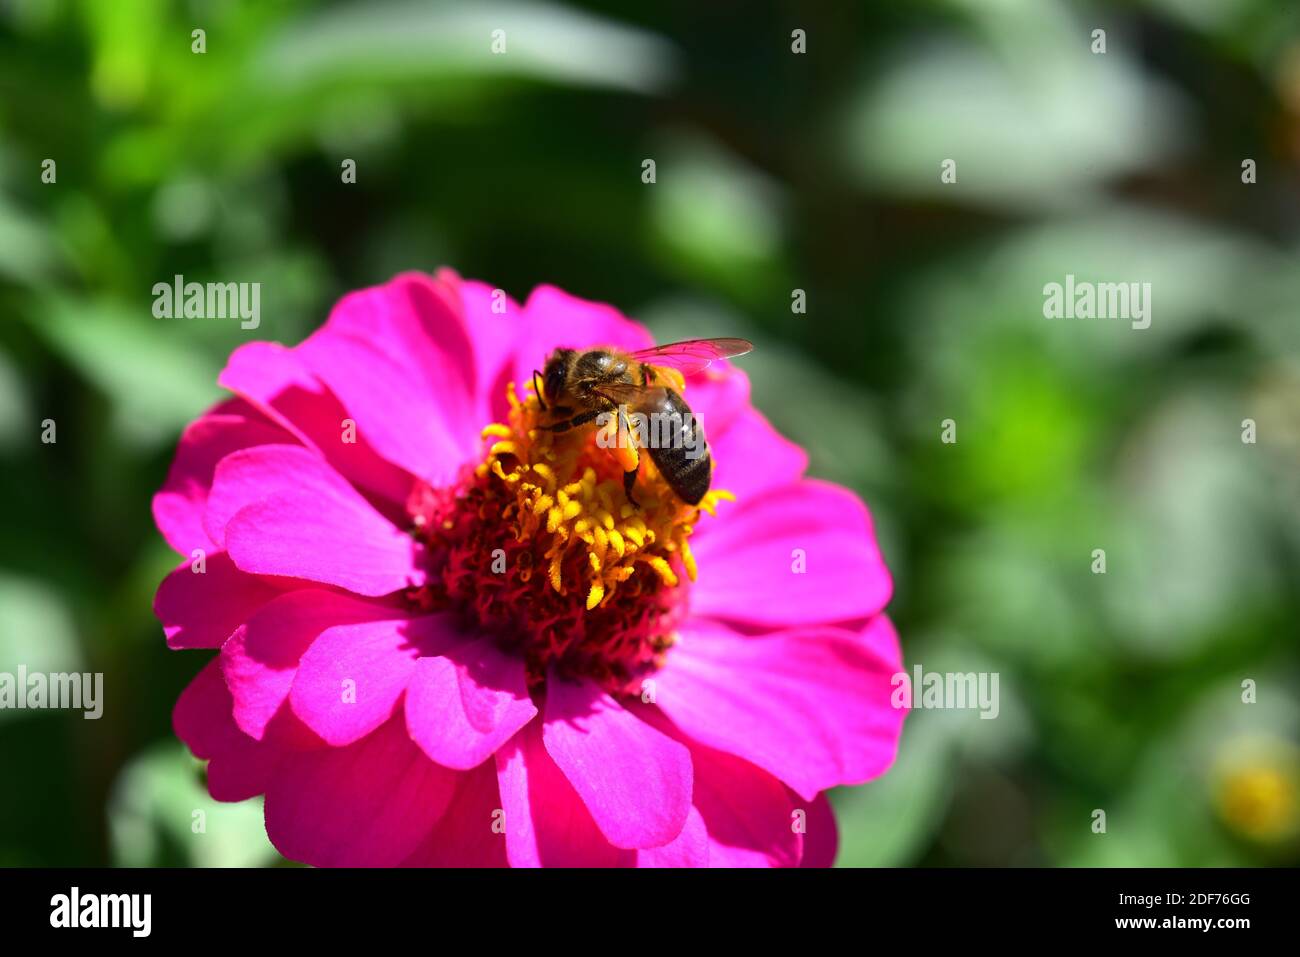 European honey bee (Apis mellifera or Apis mellifica) is an hymenoptera insect honey producer. Zinnia flower. Stock Photo